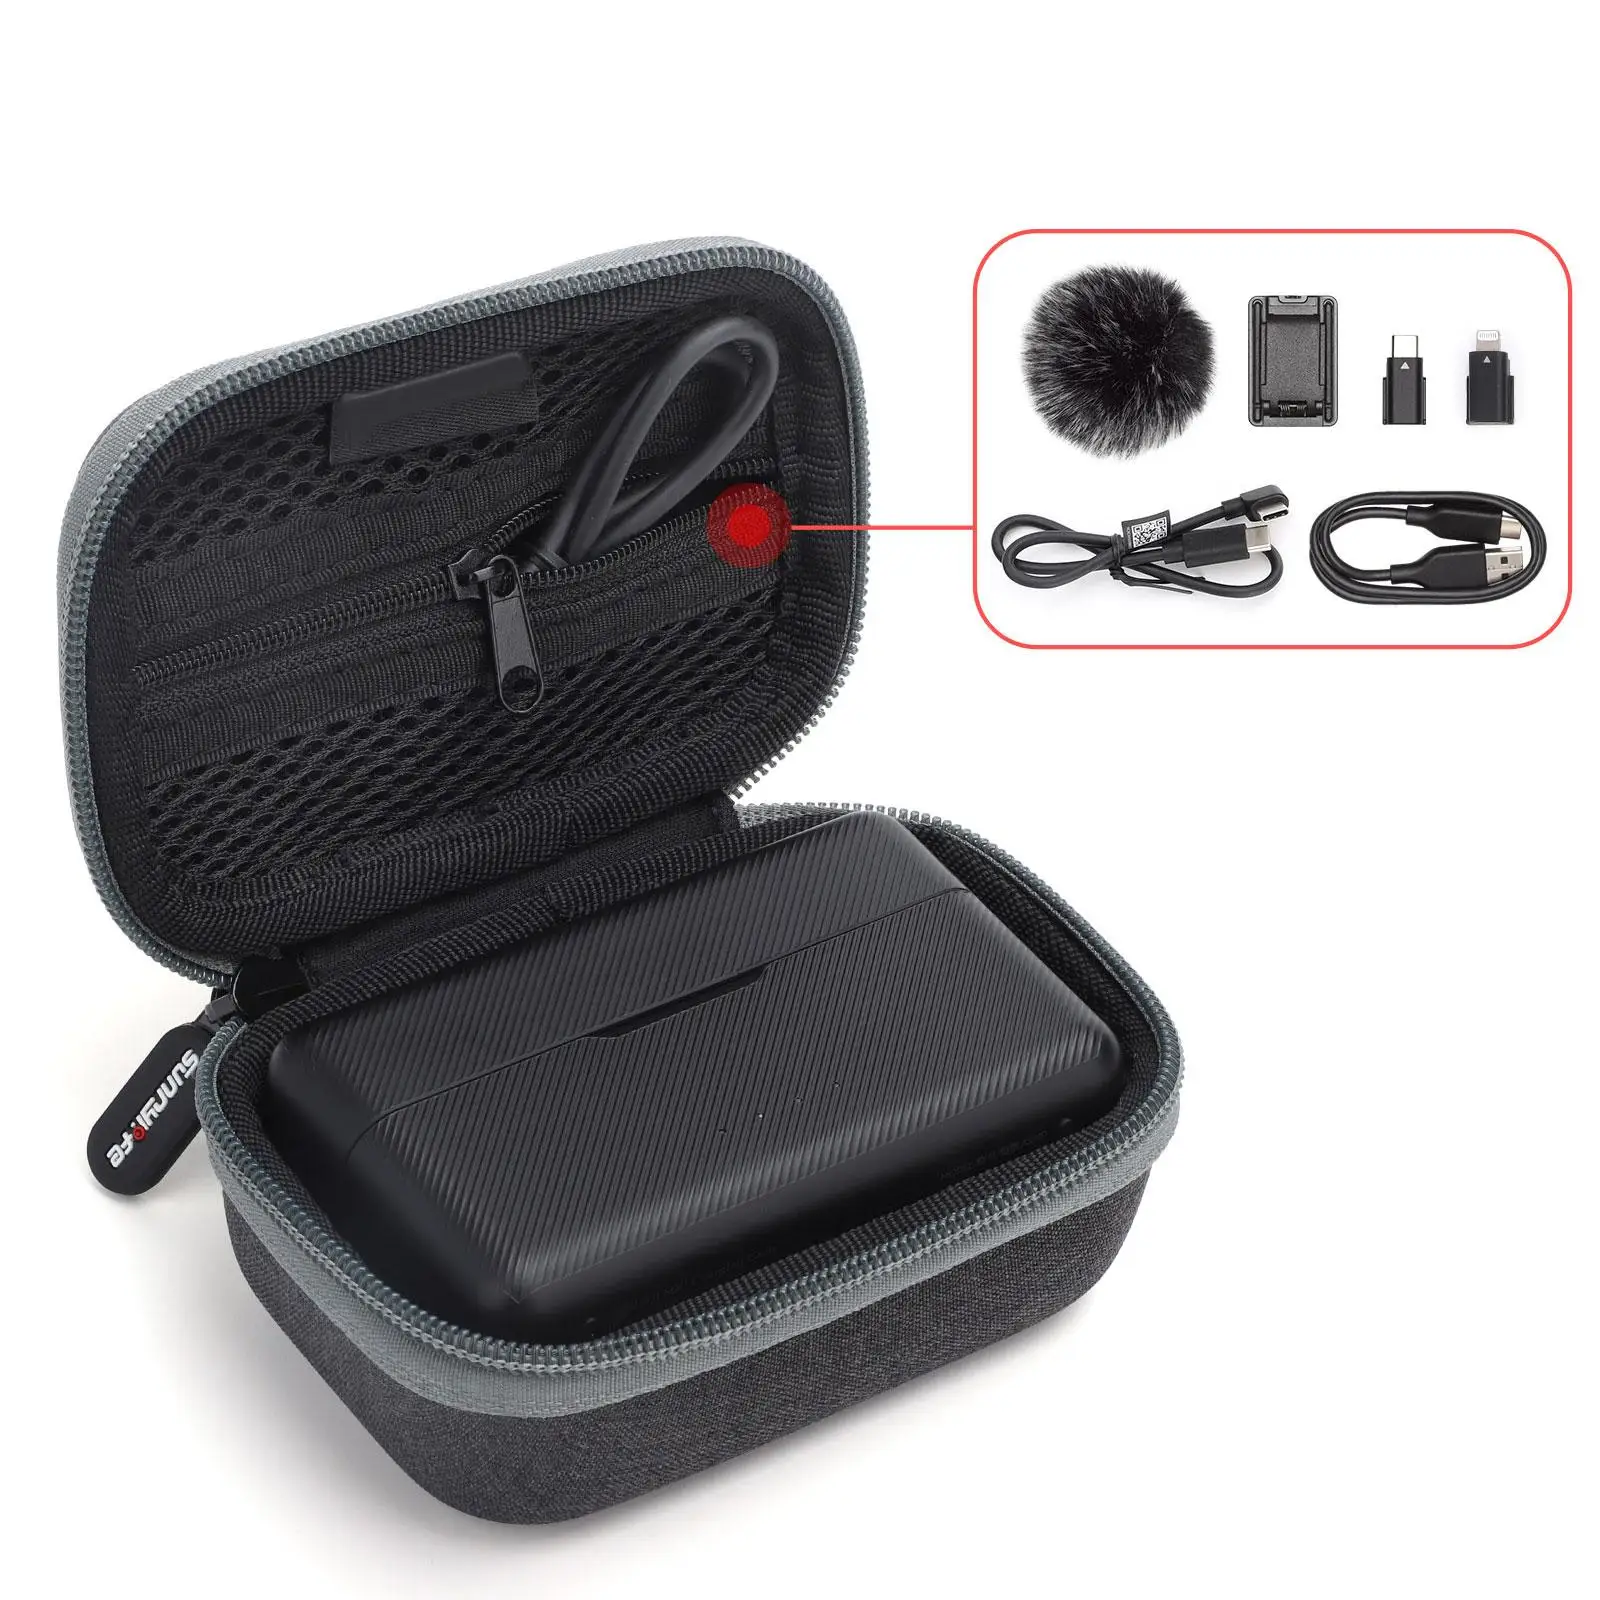 Portable Travel Protective Case Drone Bag for Quadcopter Drone RC Aircraft Accessories